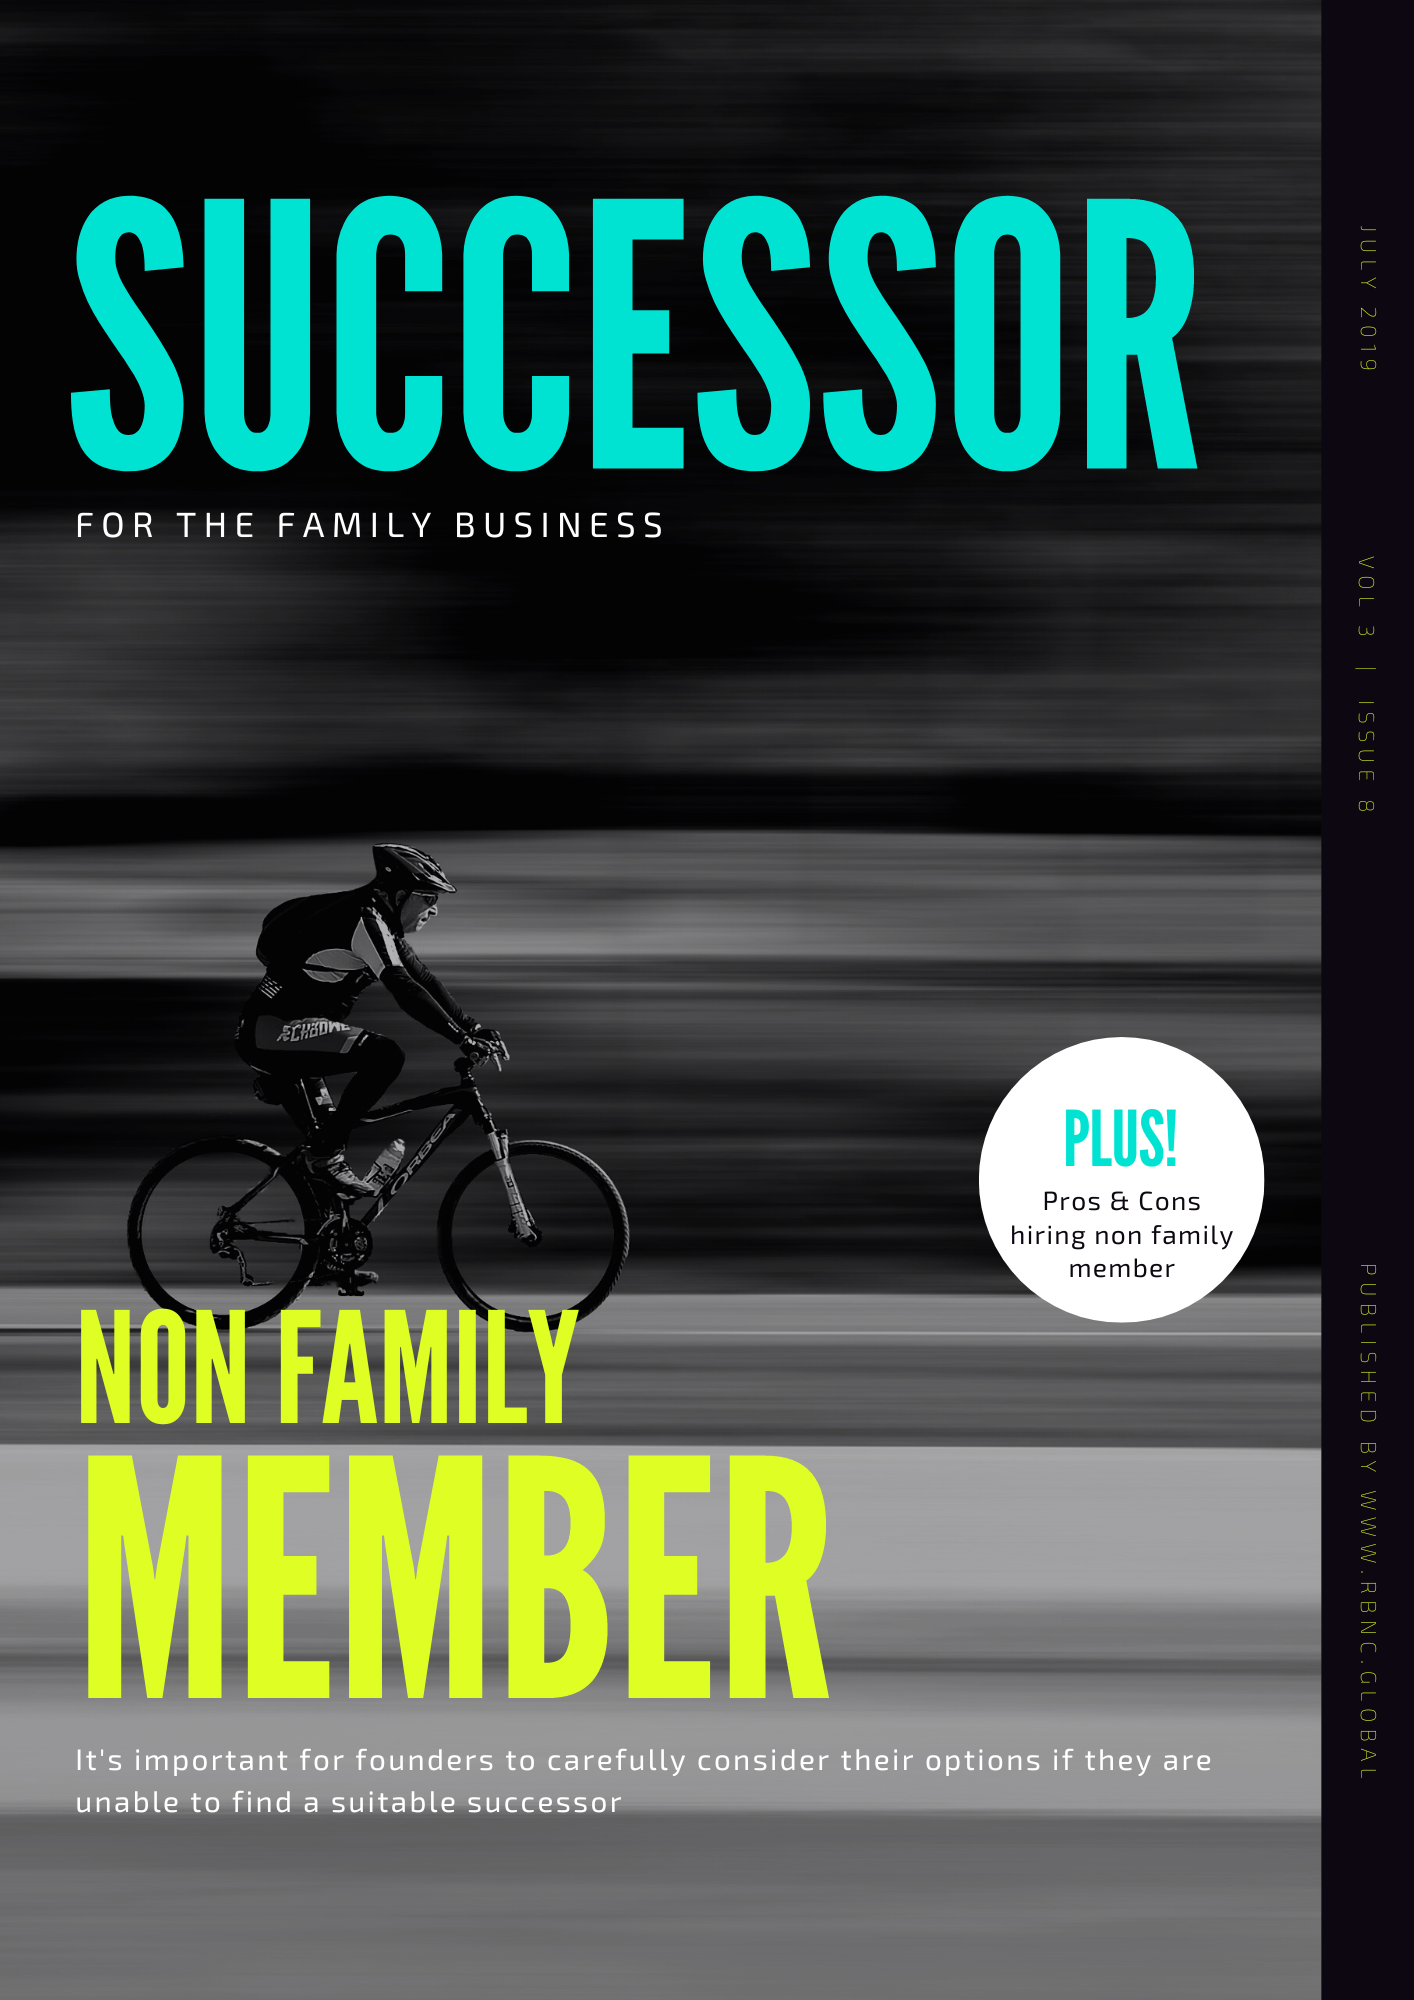 What the Founder of a Family Business Should Do If They Cannot Find a Successor